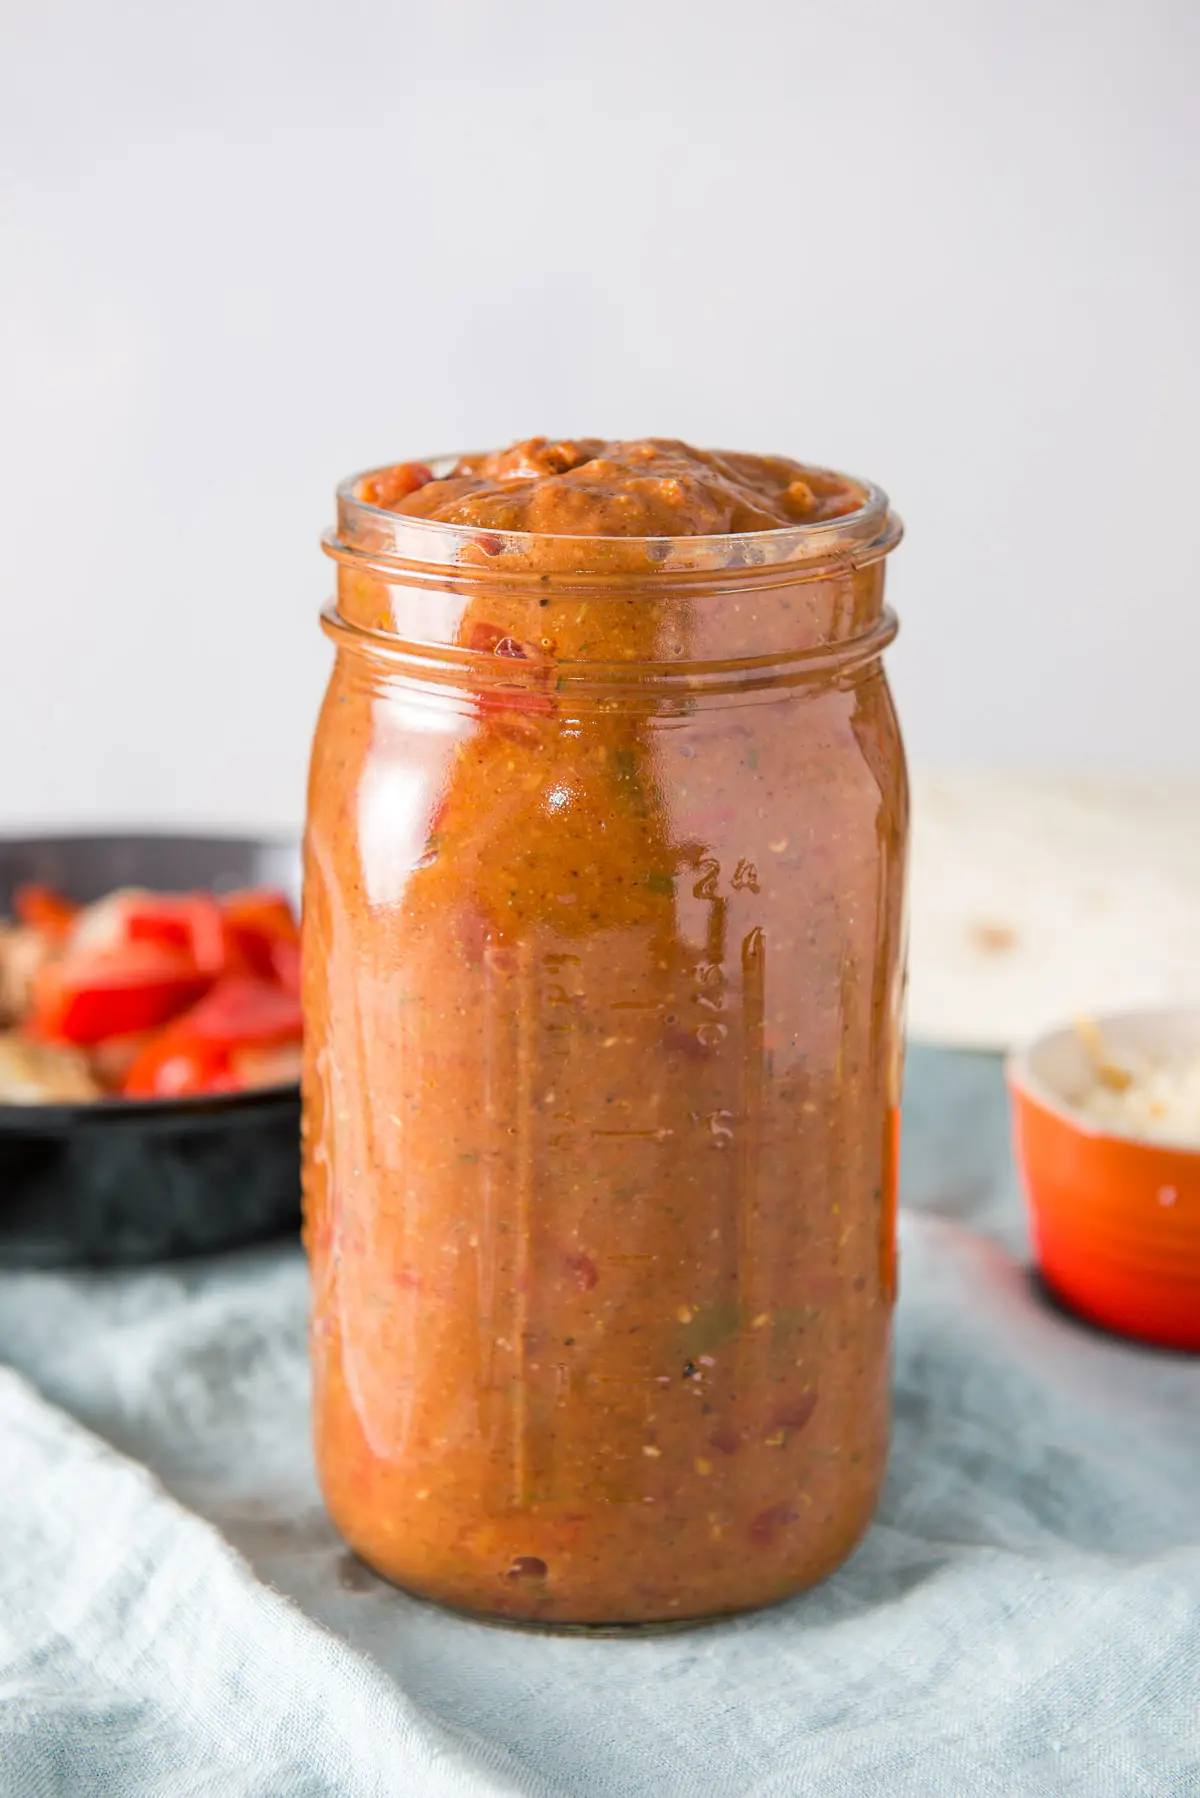 Vertical view of a large jar filled with the red sauce. There is a pan of vegetables, tortillas and cheese in the background